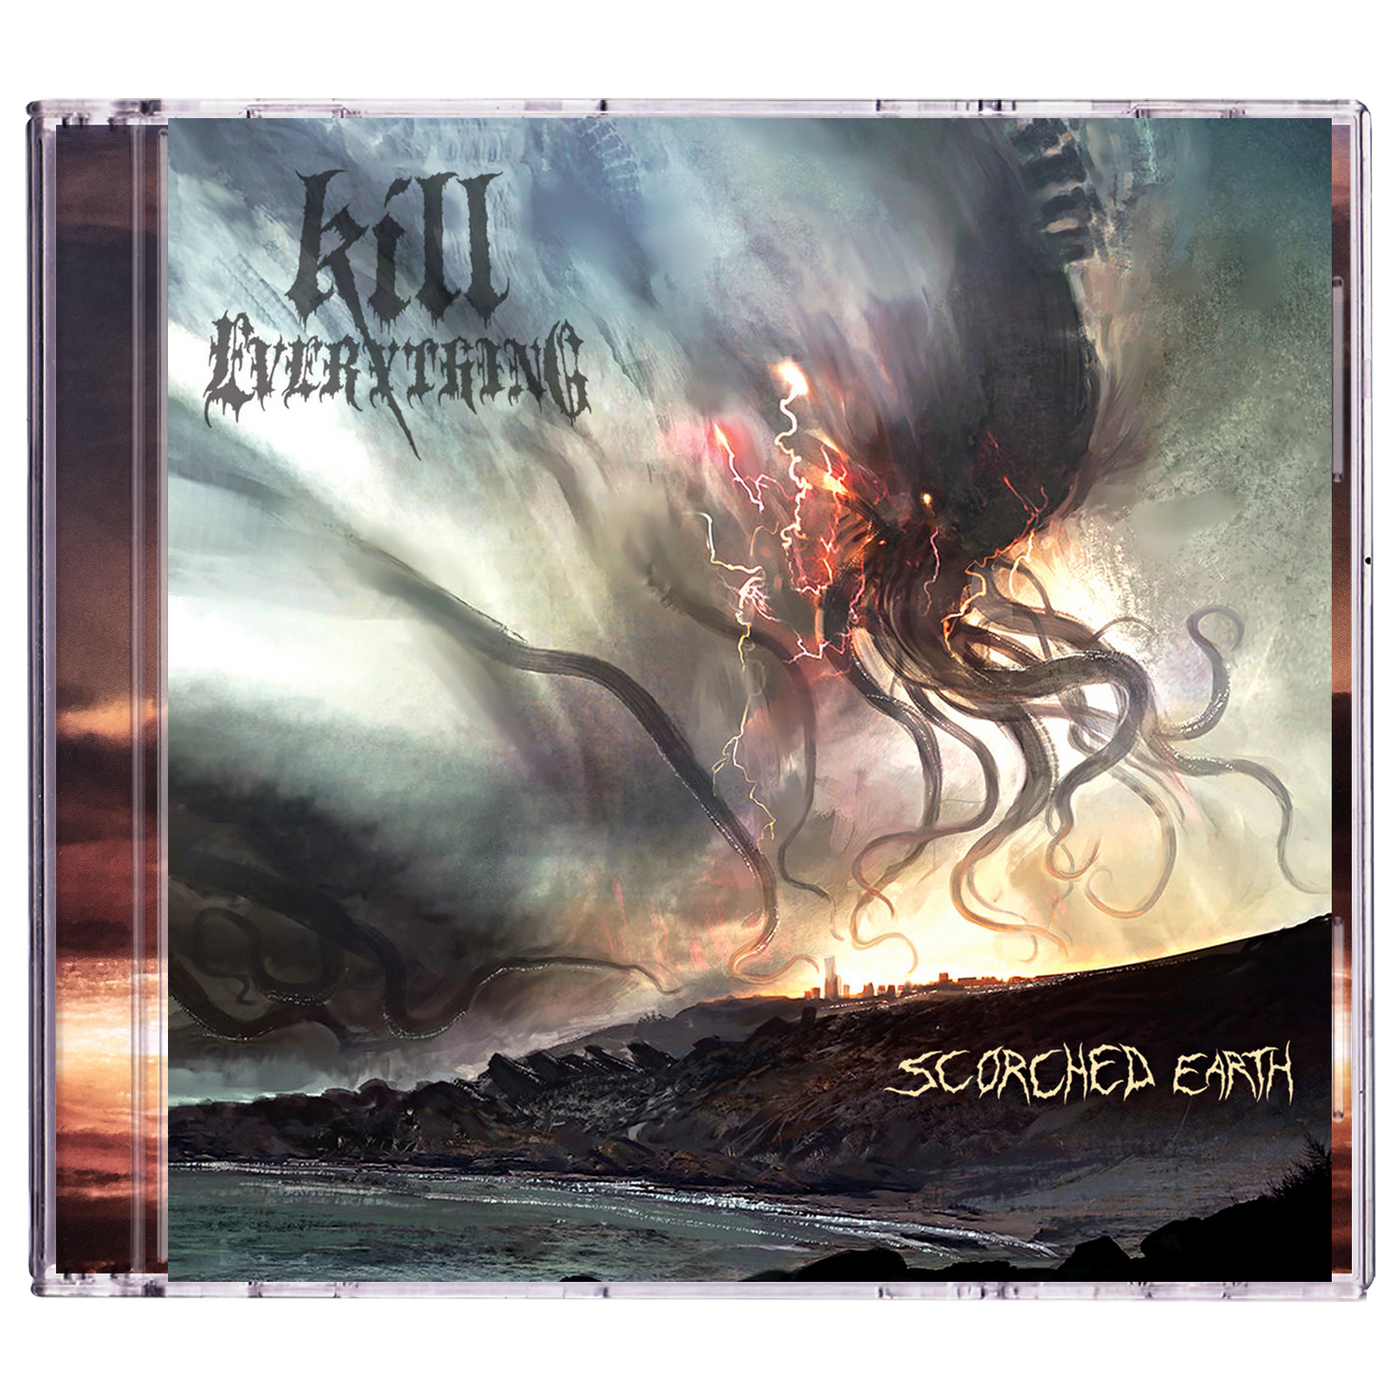 Kill Everything 'Scorched Earth' CD